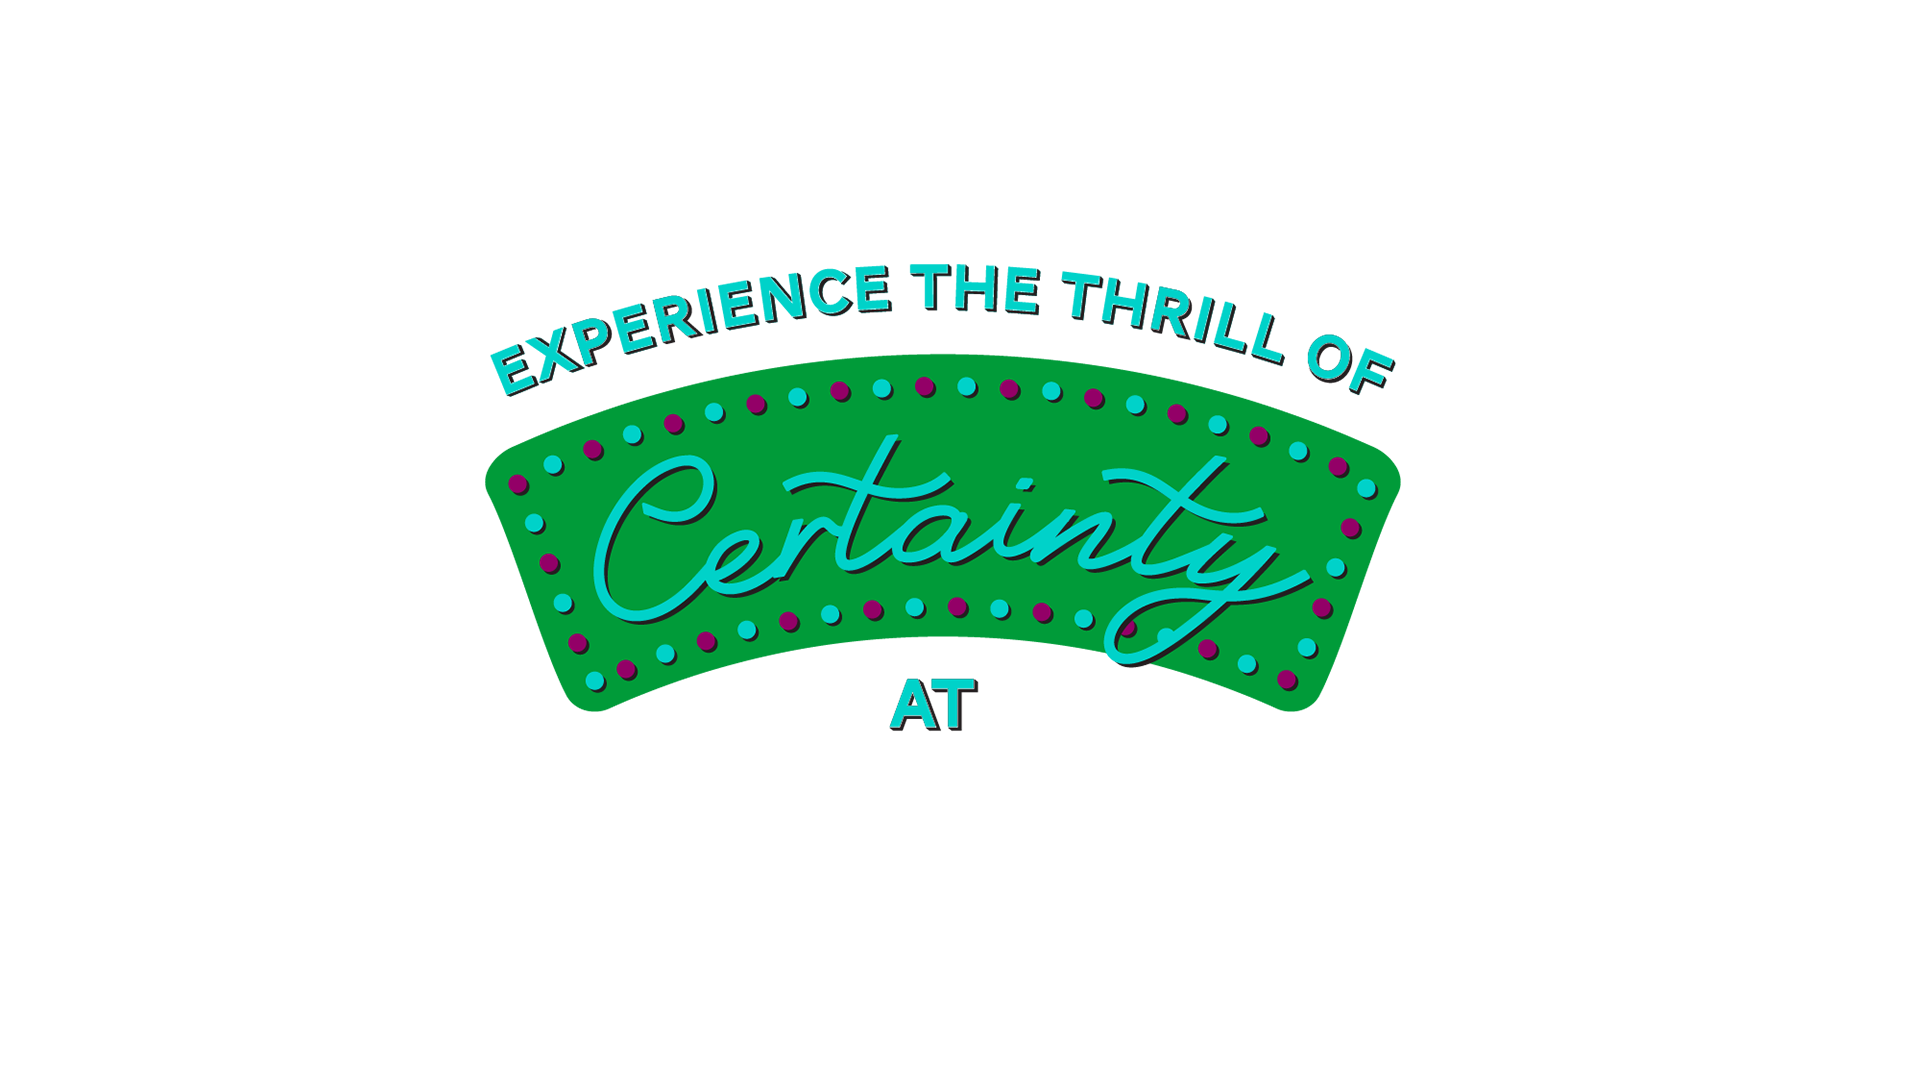 A new QliKWorld is here! - Register Now